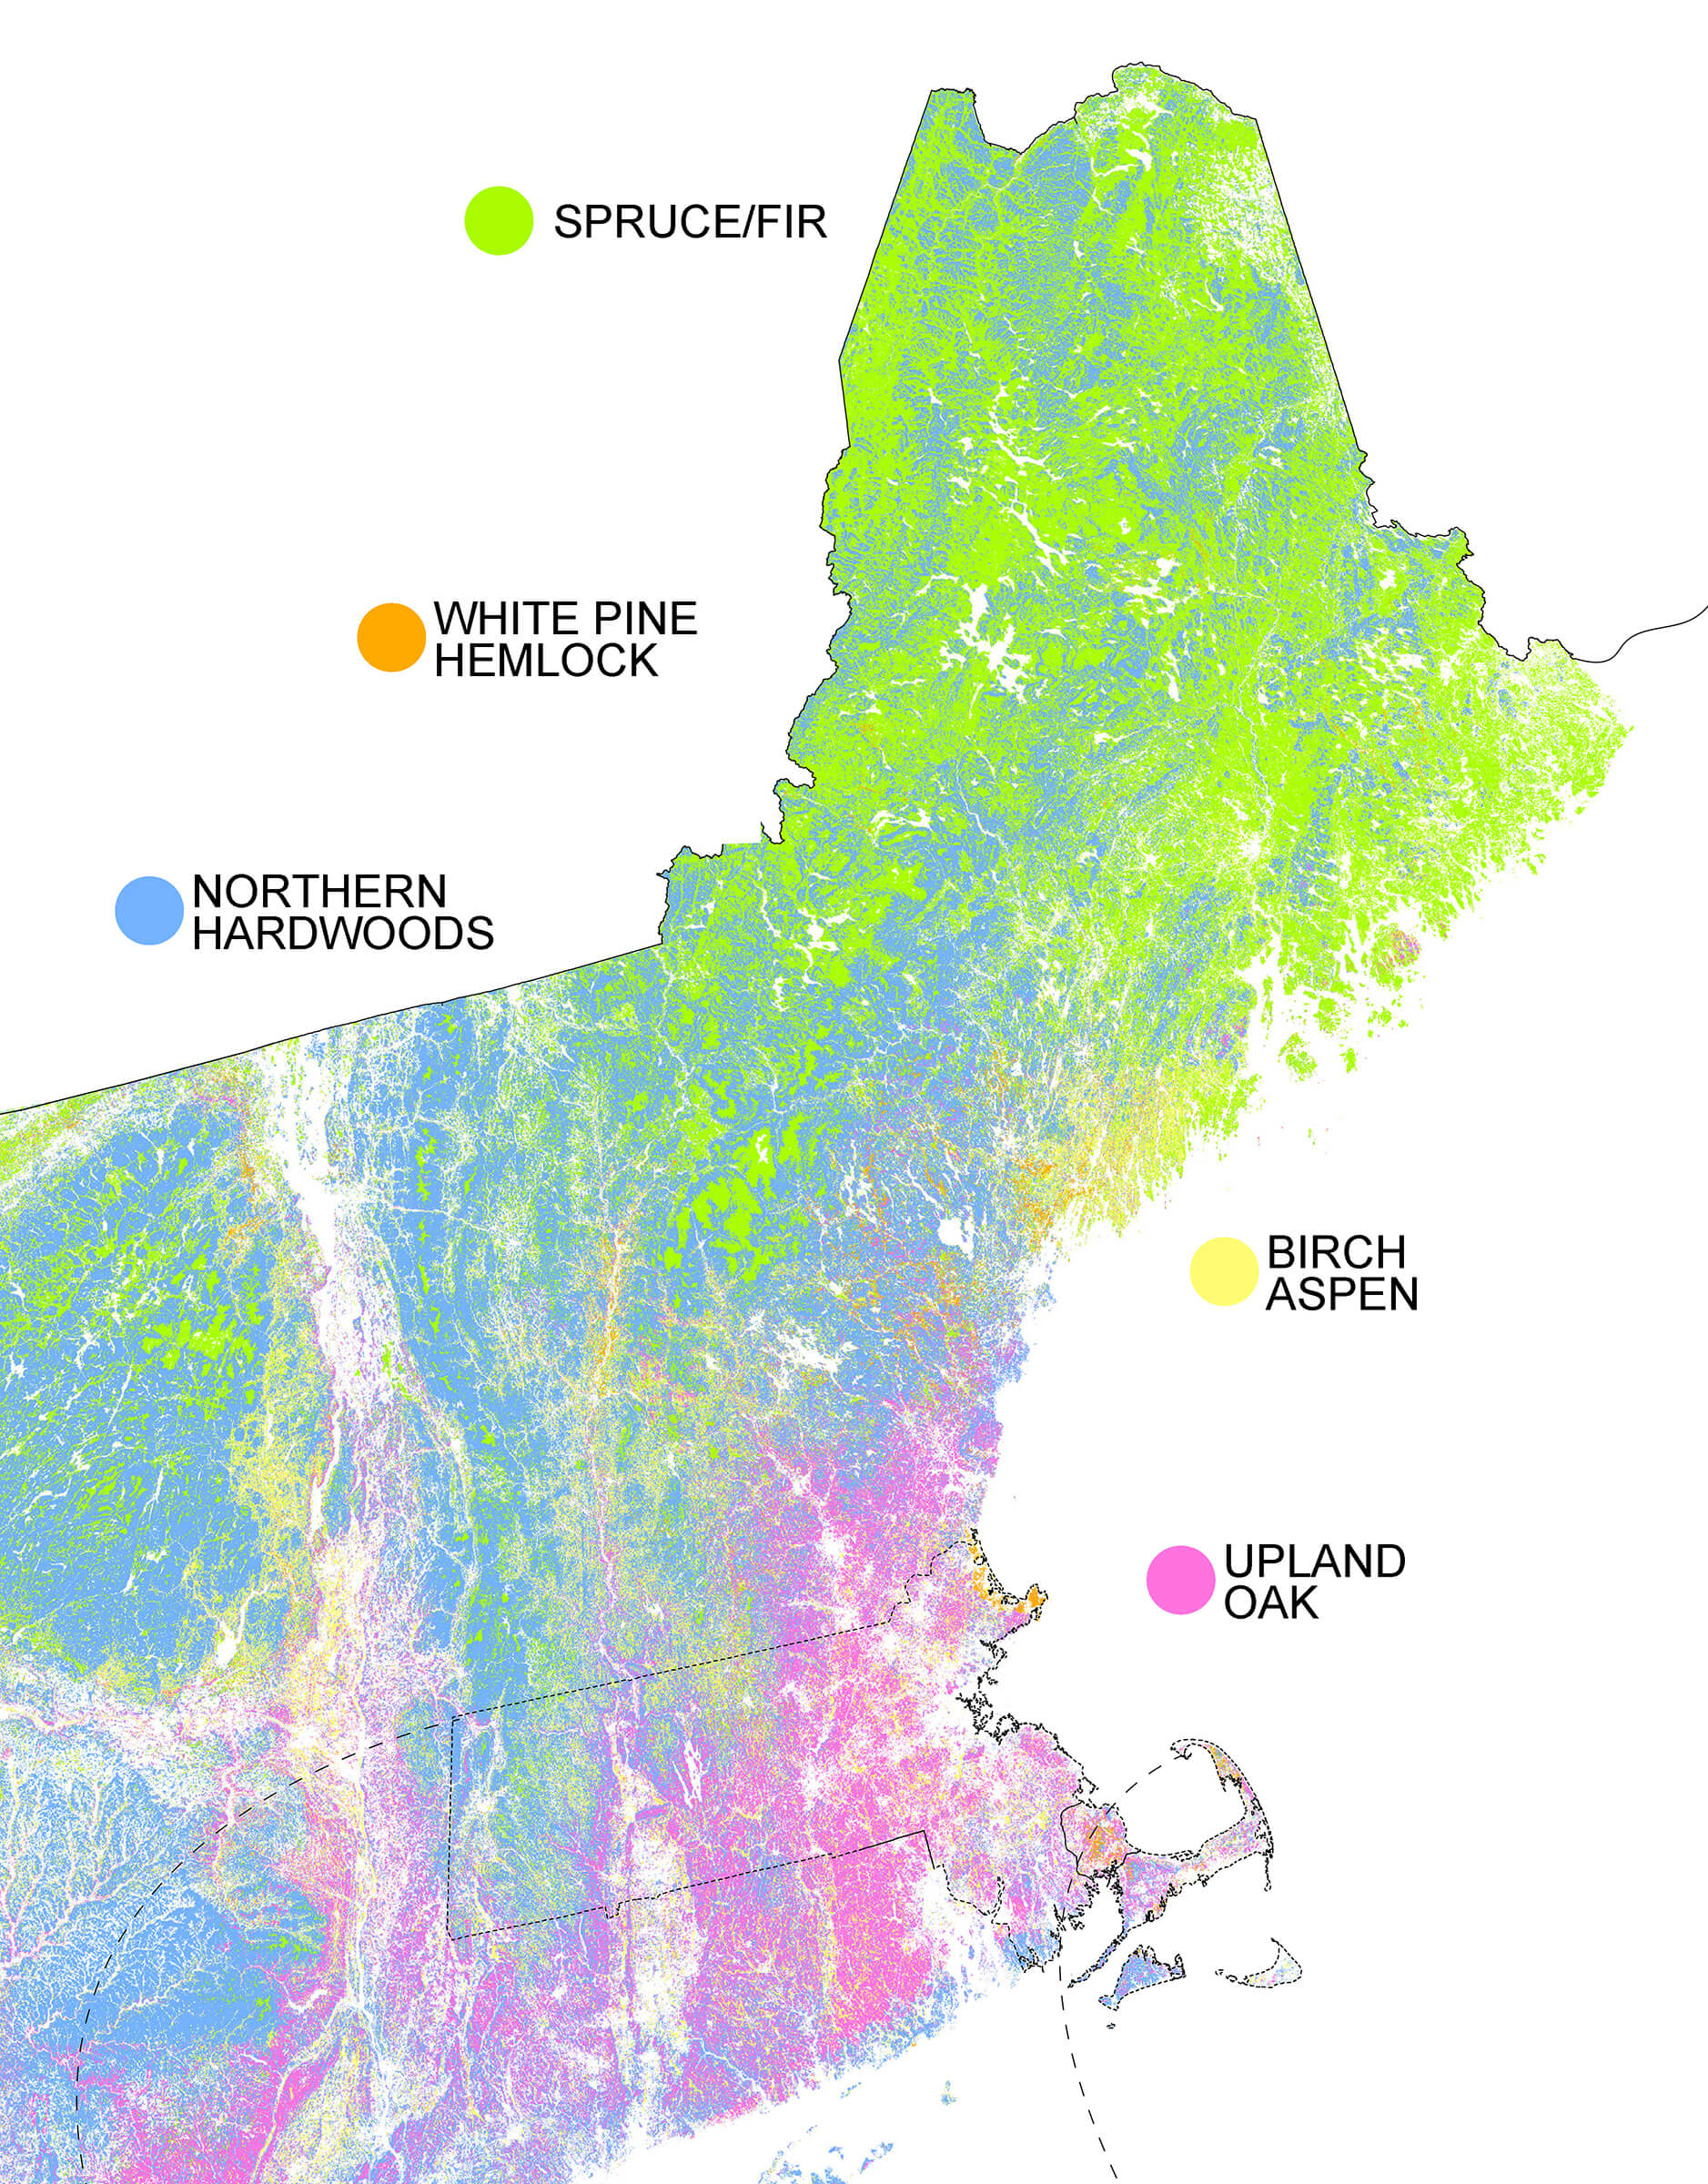 A heat map of timber production across New England showing spruce, birch, oak, hardwoods, and hemlock